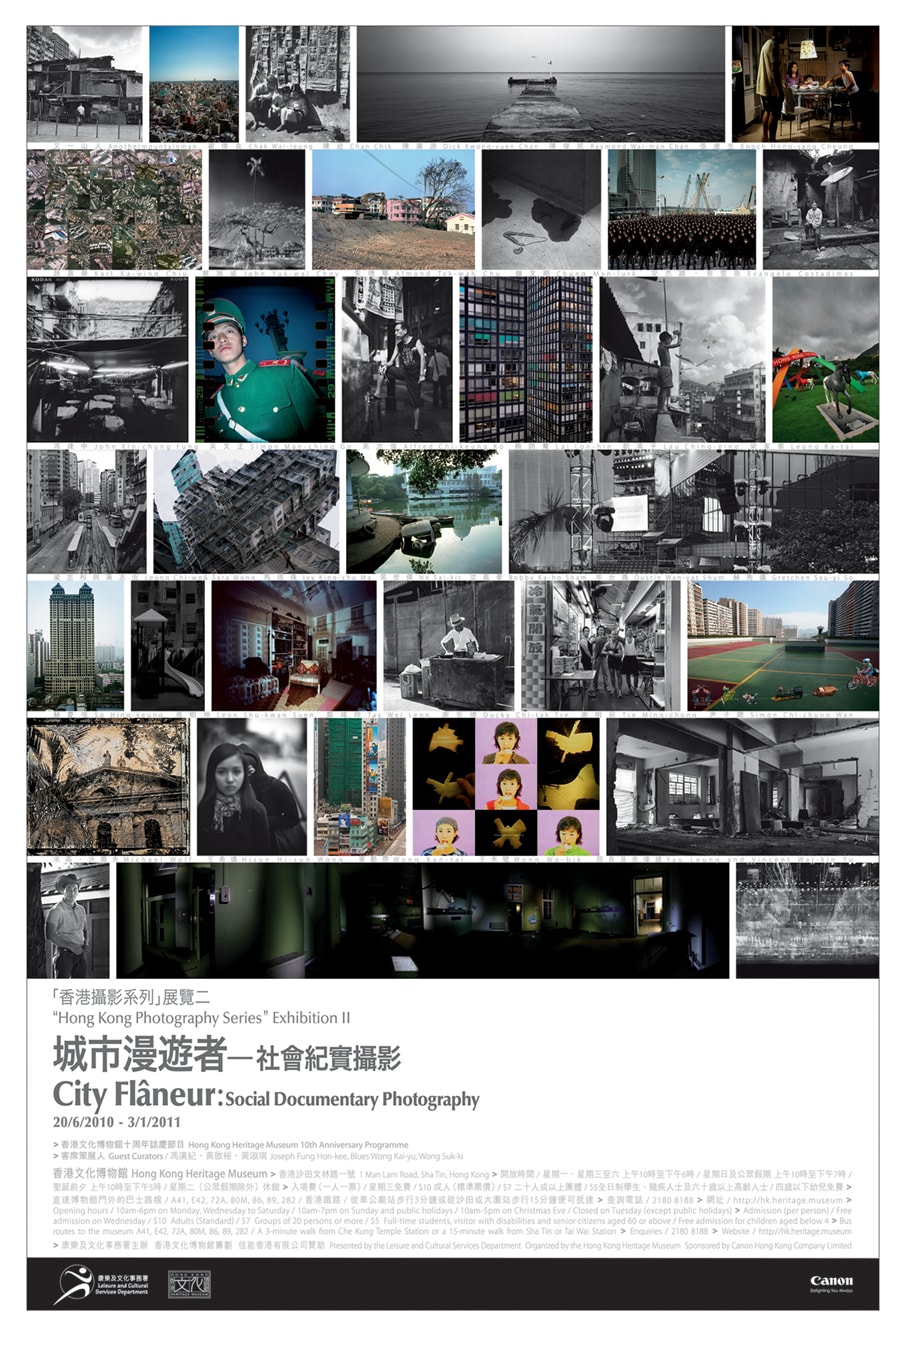 Selected Blindspot Gallery artists participate in “City Flânuer: Social Documentary Photography” at the Hong Kong Heritage Museum